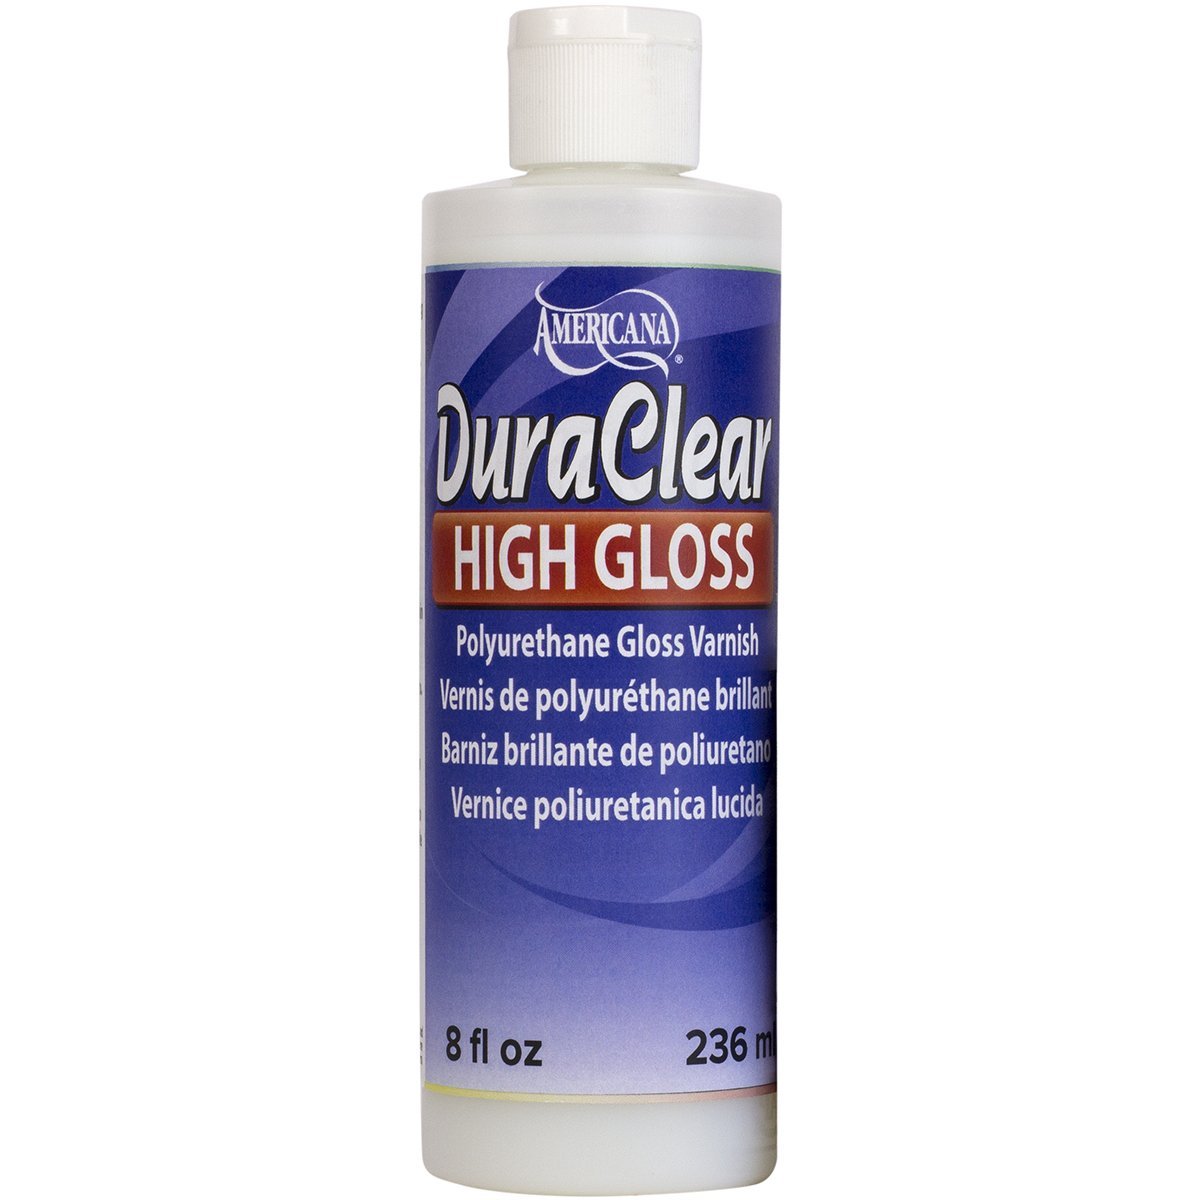 VERNICE DURACLEAR HIGH GLOSS 236ml - Out of the Wood